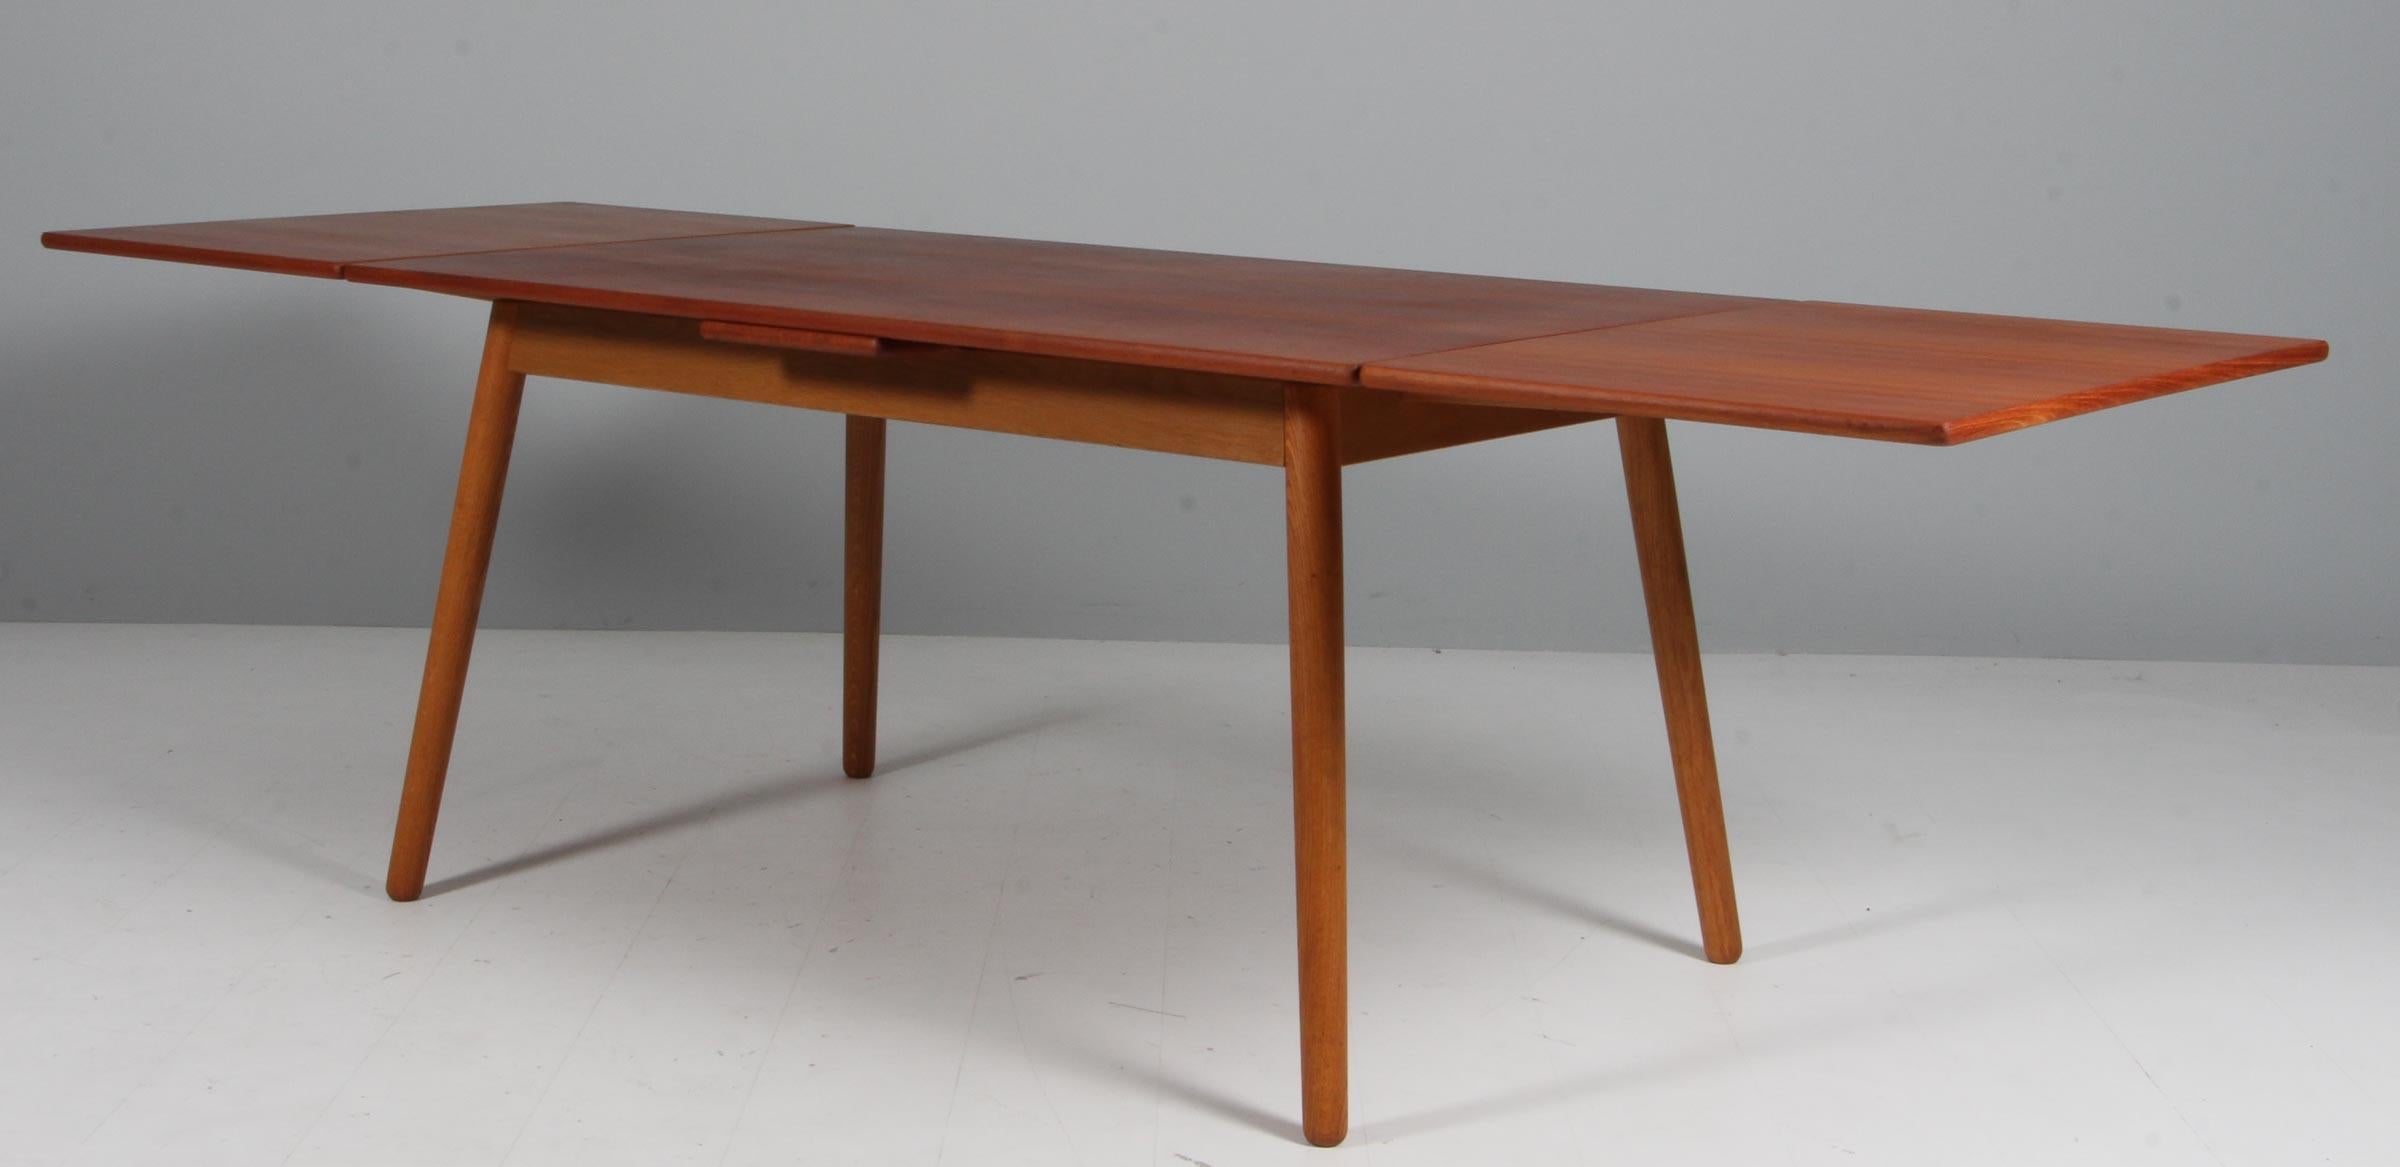 Poul Volther for FDB dining table in teak and oak, extension leafes. In Good Condition For Sale In Esbjerg, DK